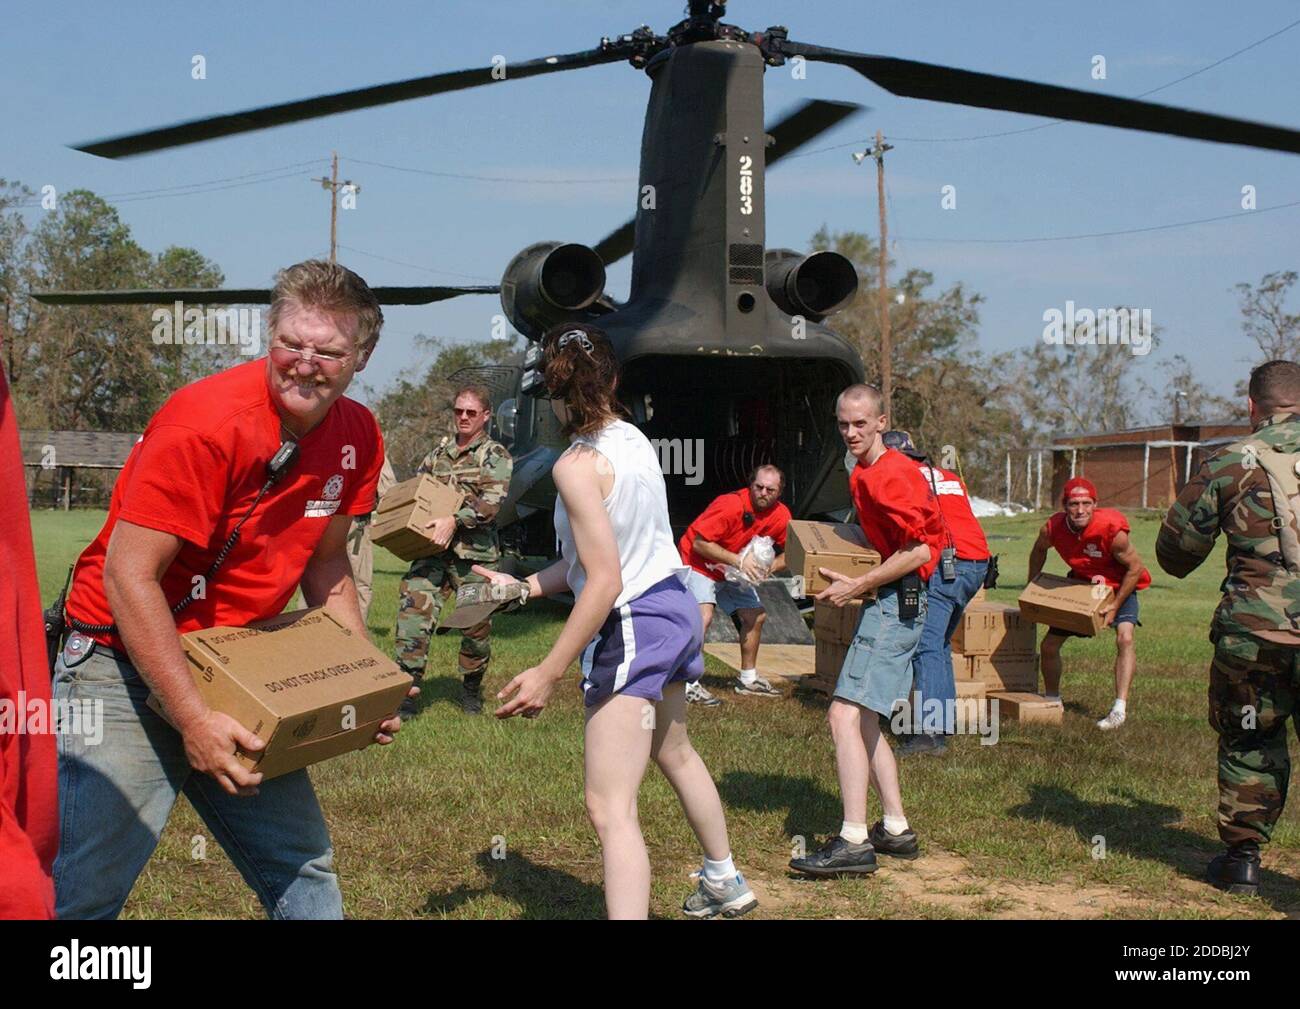 NO FILM, NO VIDEO, NO TV, NO DOCUMENTARY - Saucier Fire and Rescue Department James Barnett (L) and other volunteers unload boxes of bottled water from a militarty Chinook helicopter at the Saucier Elementary School on U.S. 49 in Biloxi, Mississippi, USA, on Friday, September 2, 2005. The water was handed out at a relief station for Hurricane Katrina vicitms at the school. Photo by David Purdy/Biloxi Sun Herald/KRT/ABACAPRESS.COM Stock Photo